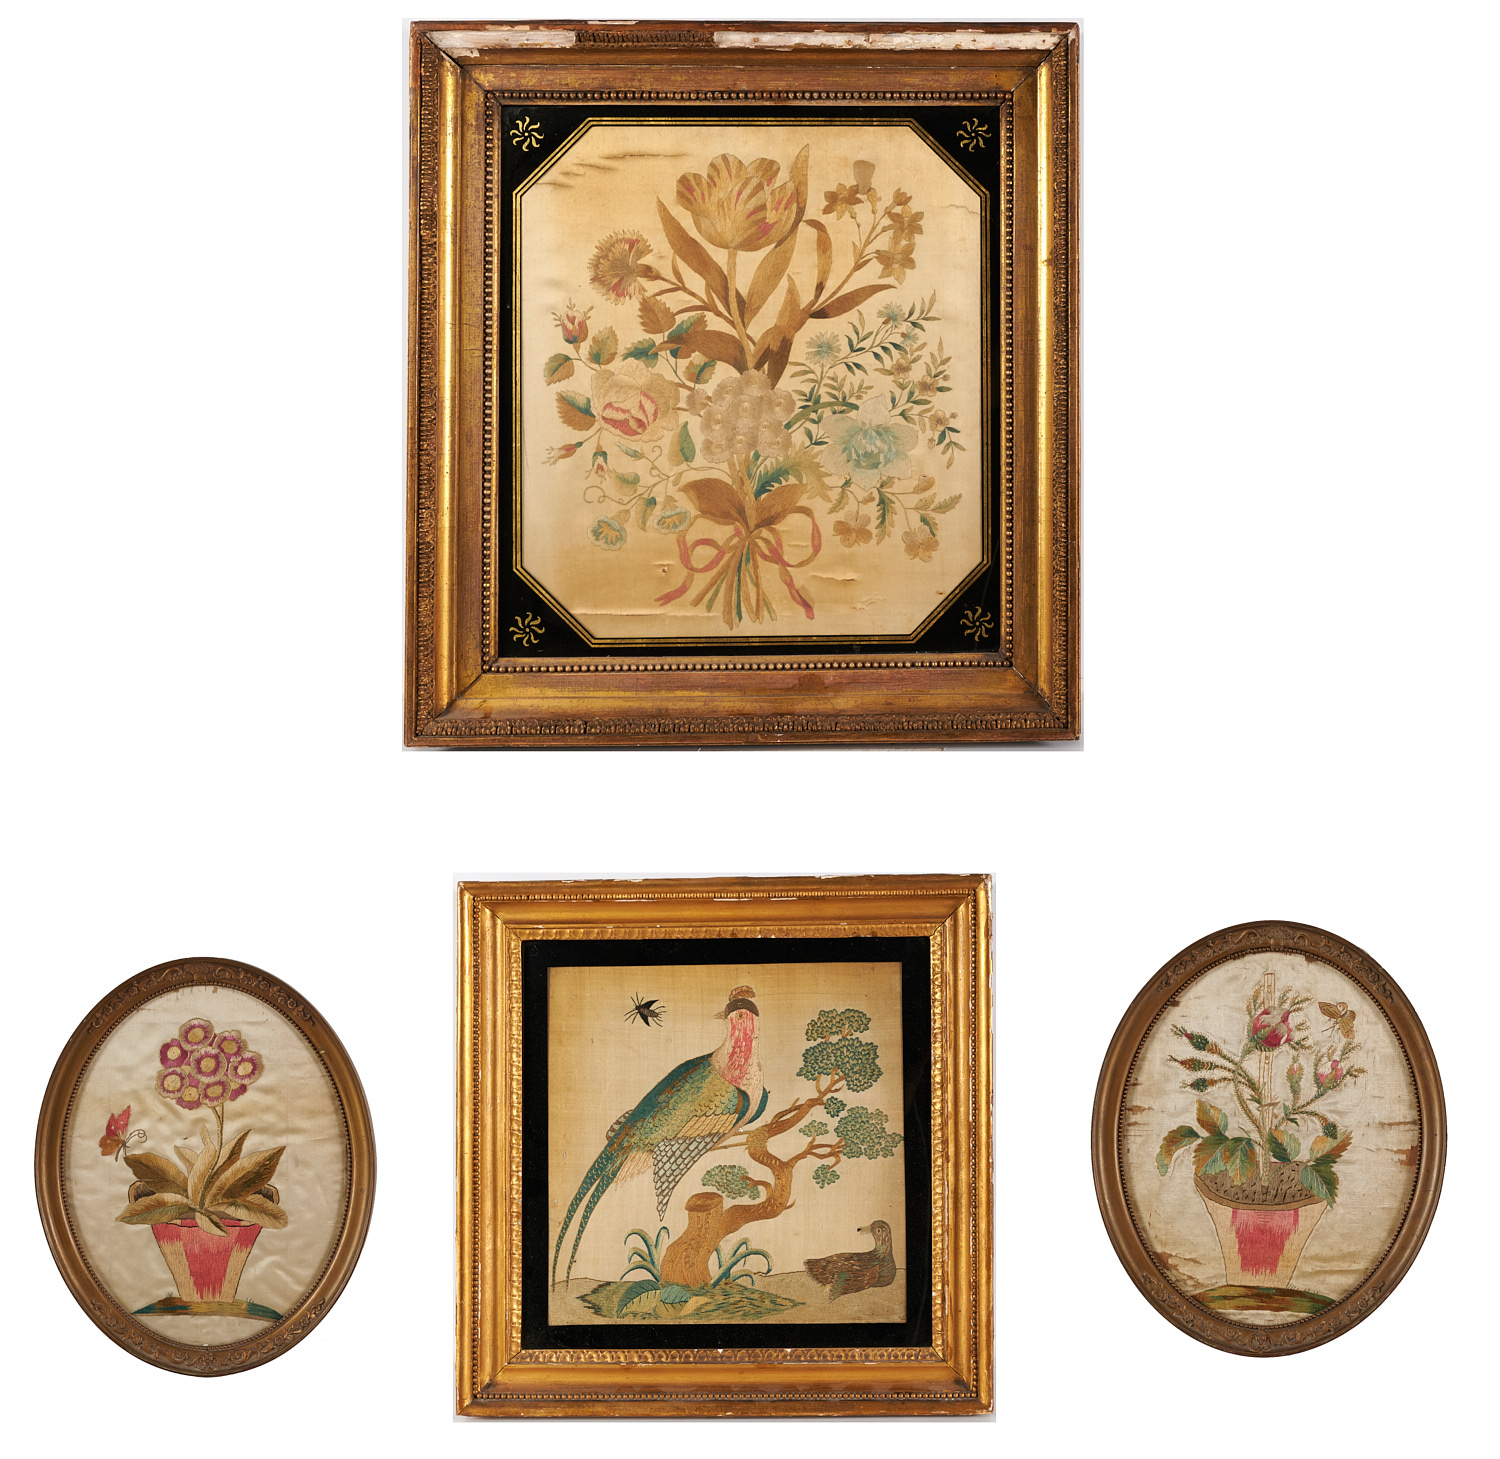  4 FRAMED SILK EMBROIDERY WORKS 3624a9